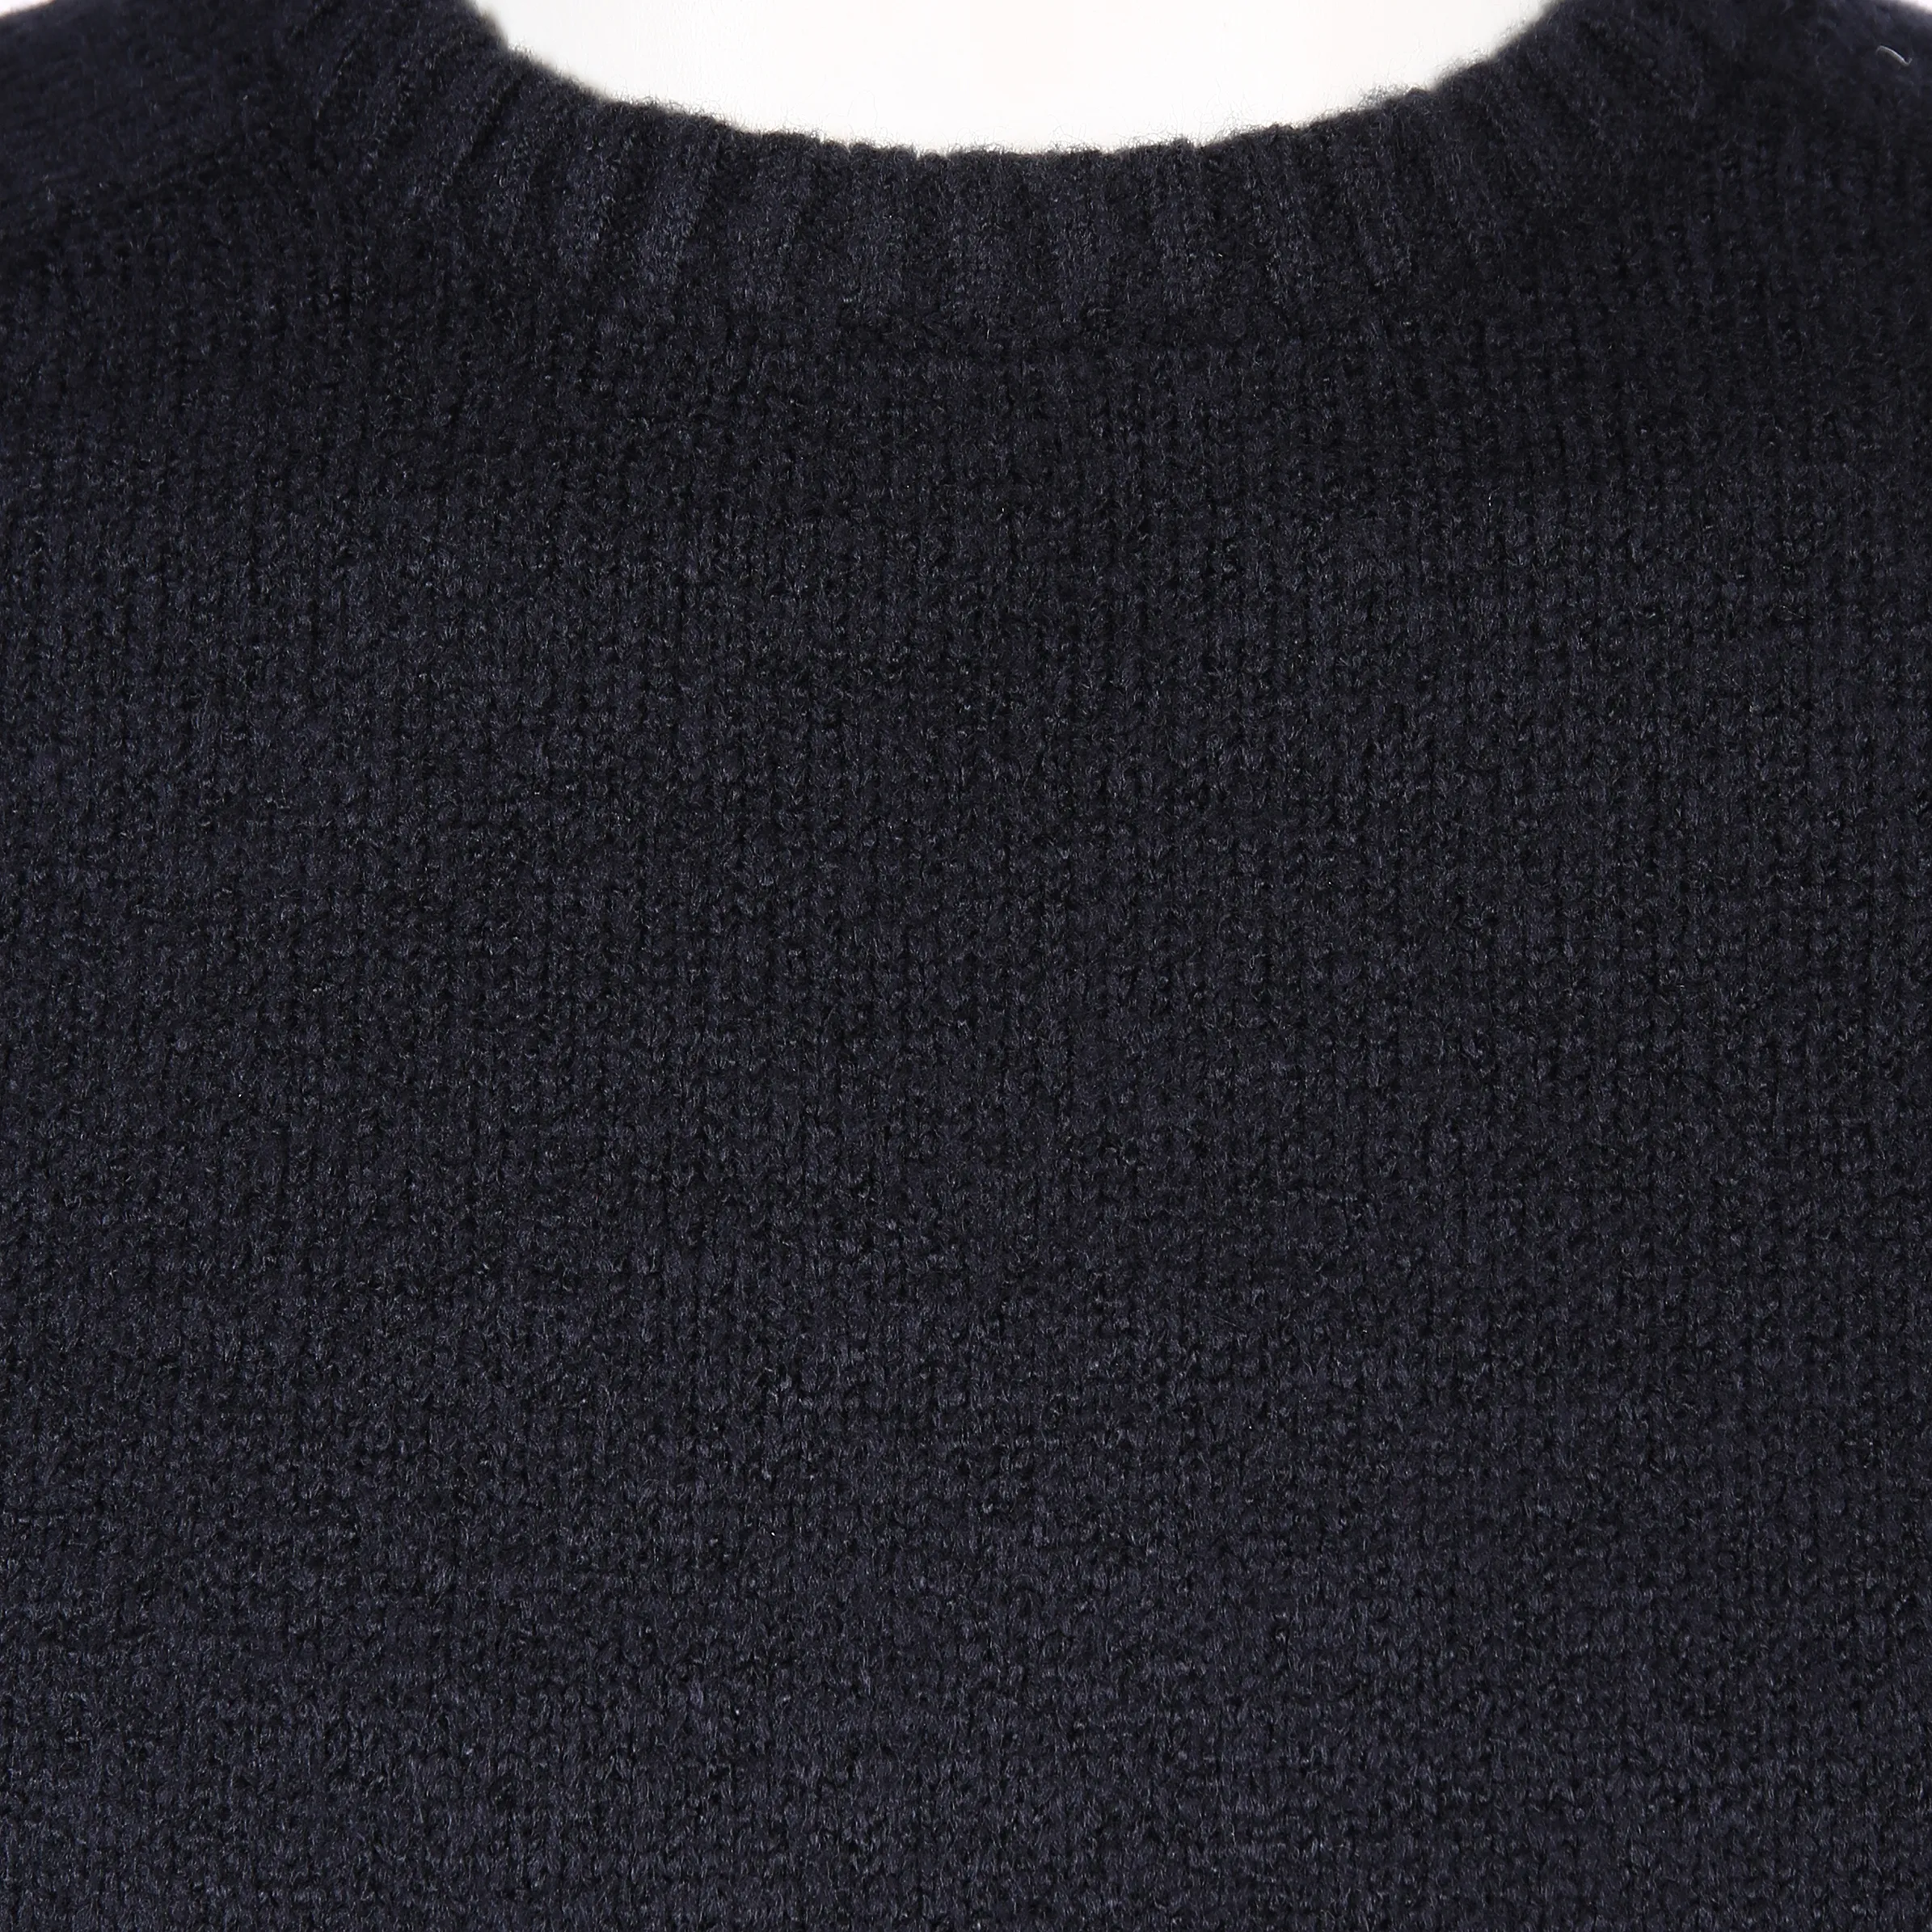 Tom Tailor 1005645 cosy knitted sweater Blau 800010 10690 3